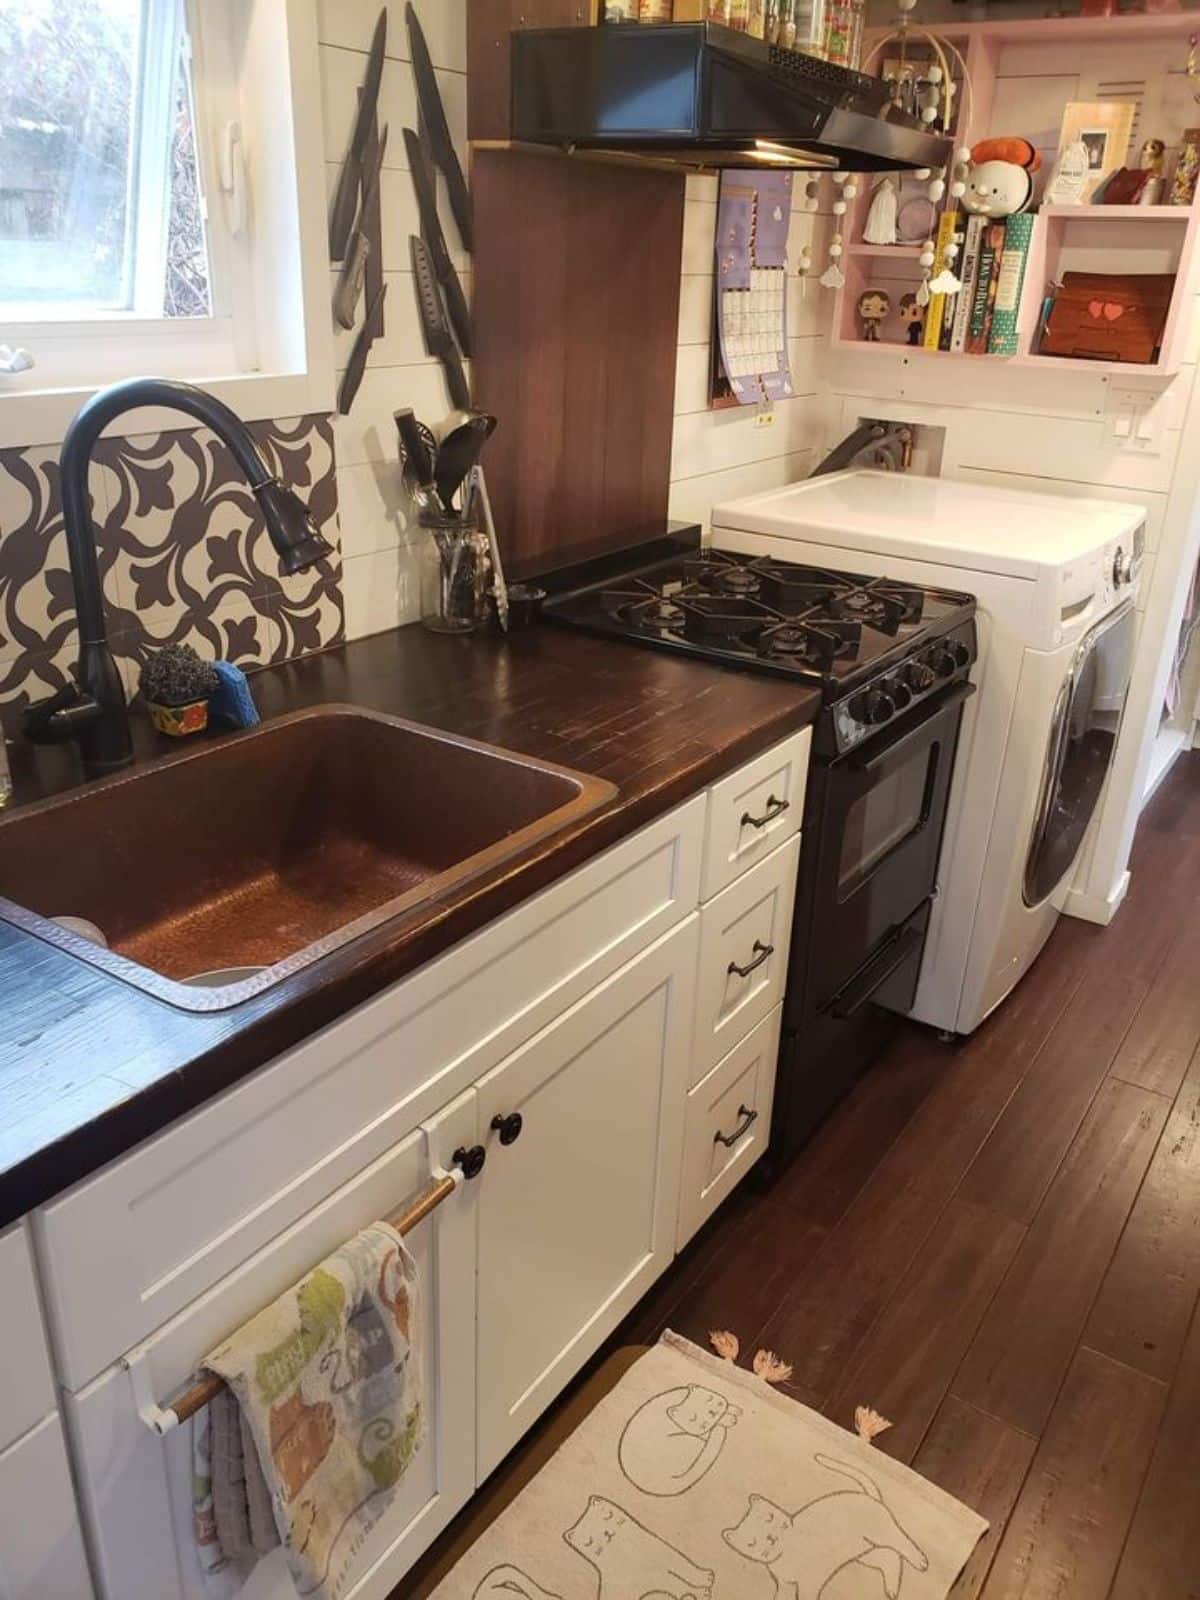 appliances present in kitchen and washer dryer combo included in the deal